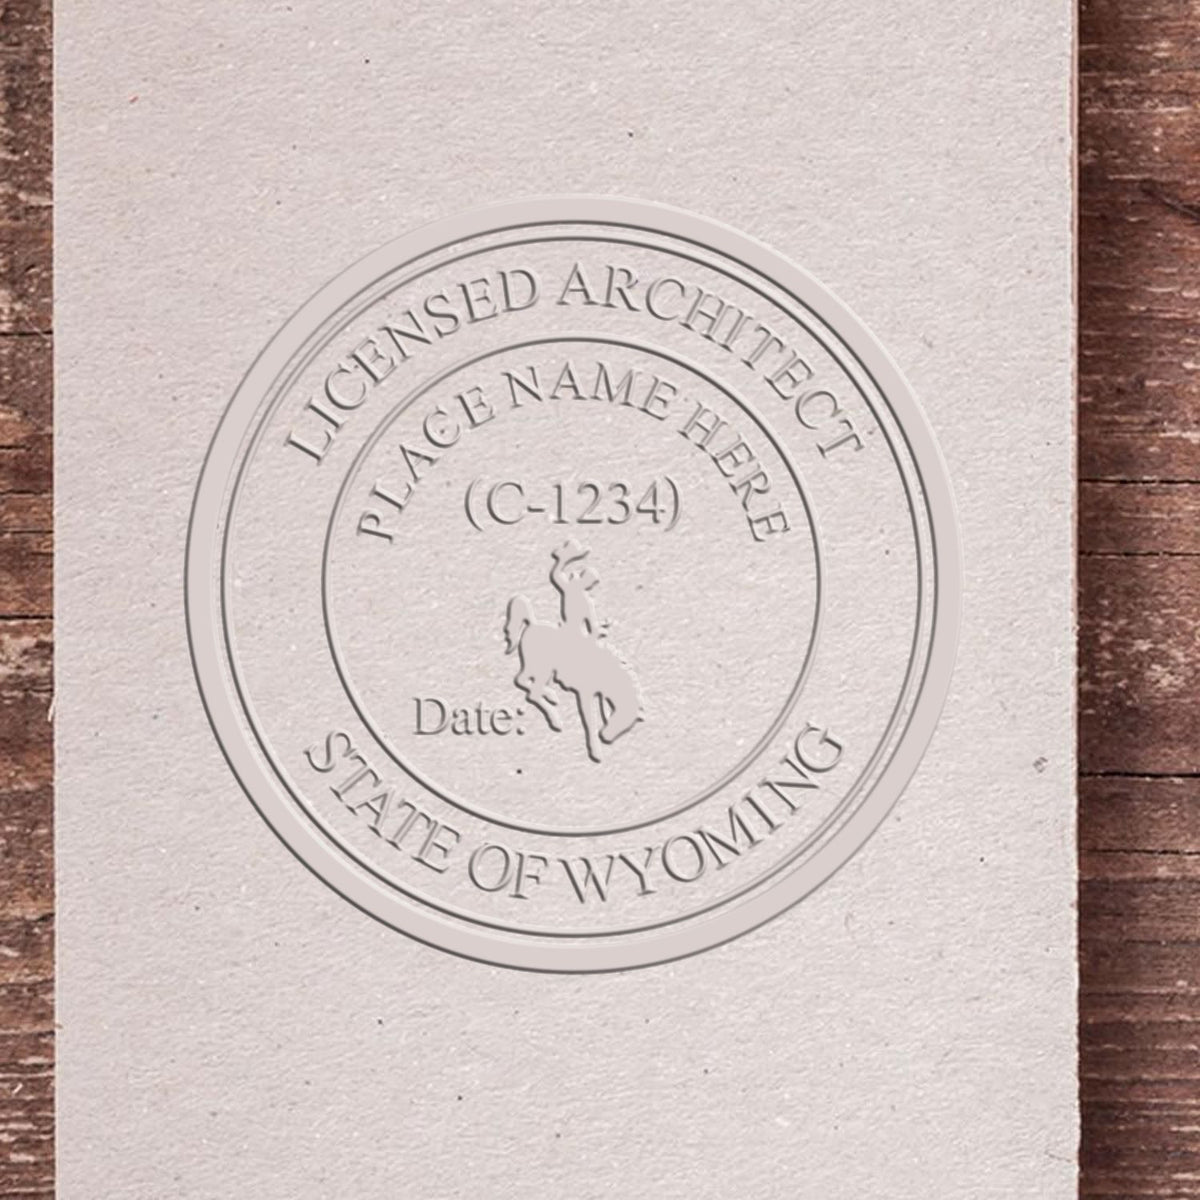 A photograph of the Hybrid Wyoming Architect Seal stamp impression reveals a vivid, professional image of the on paper.